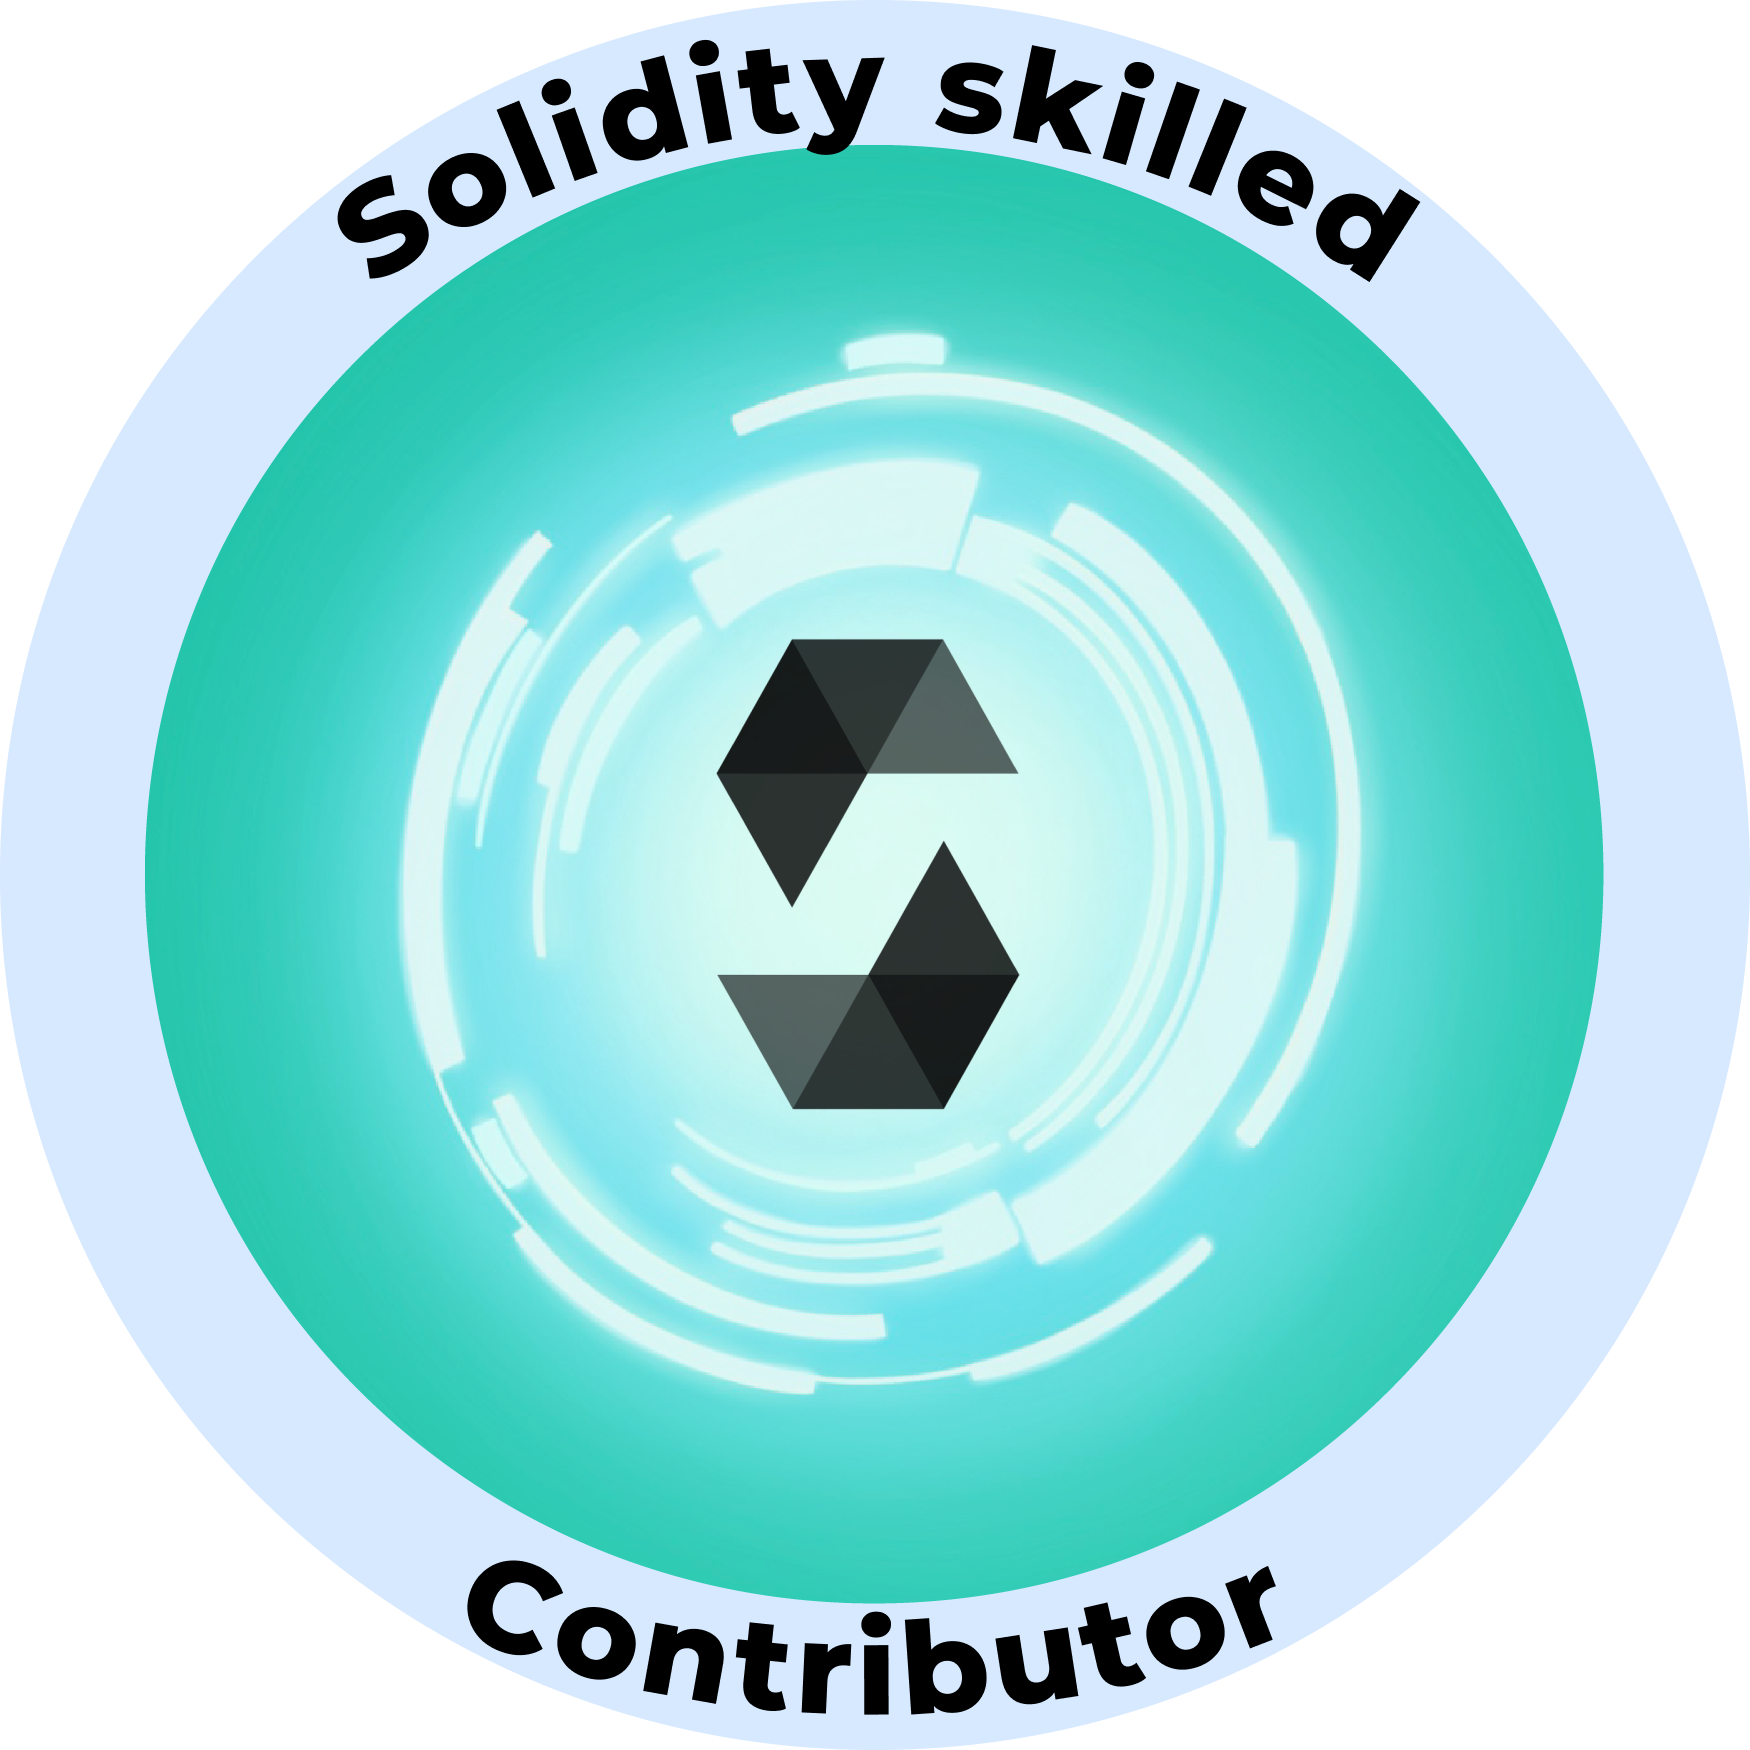 Web3 Badge | Solidity Skilled Contributor